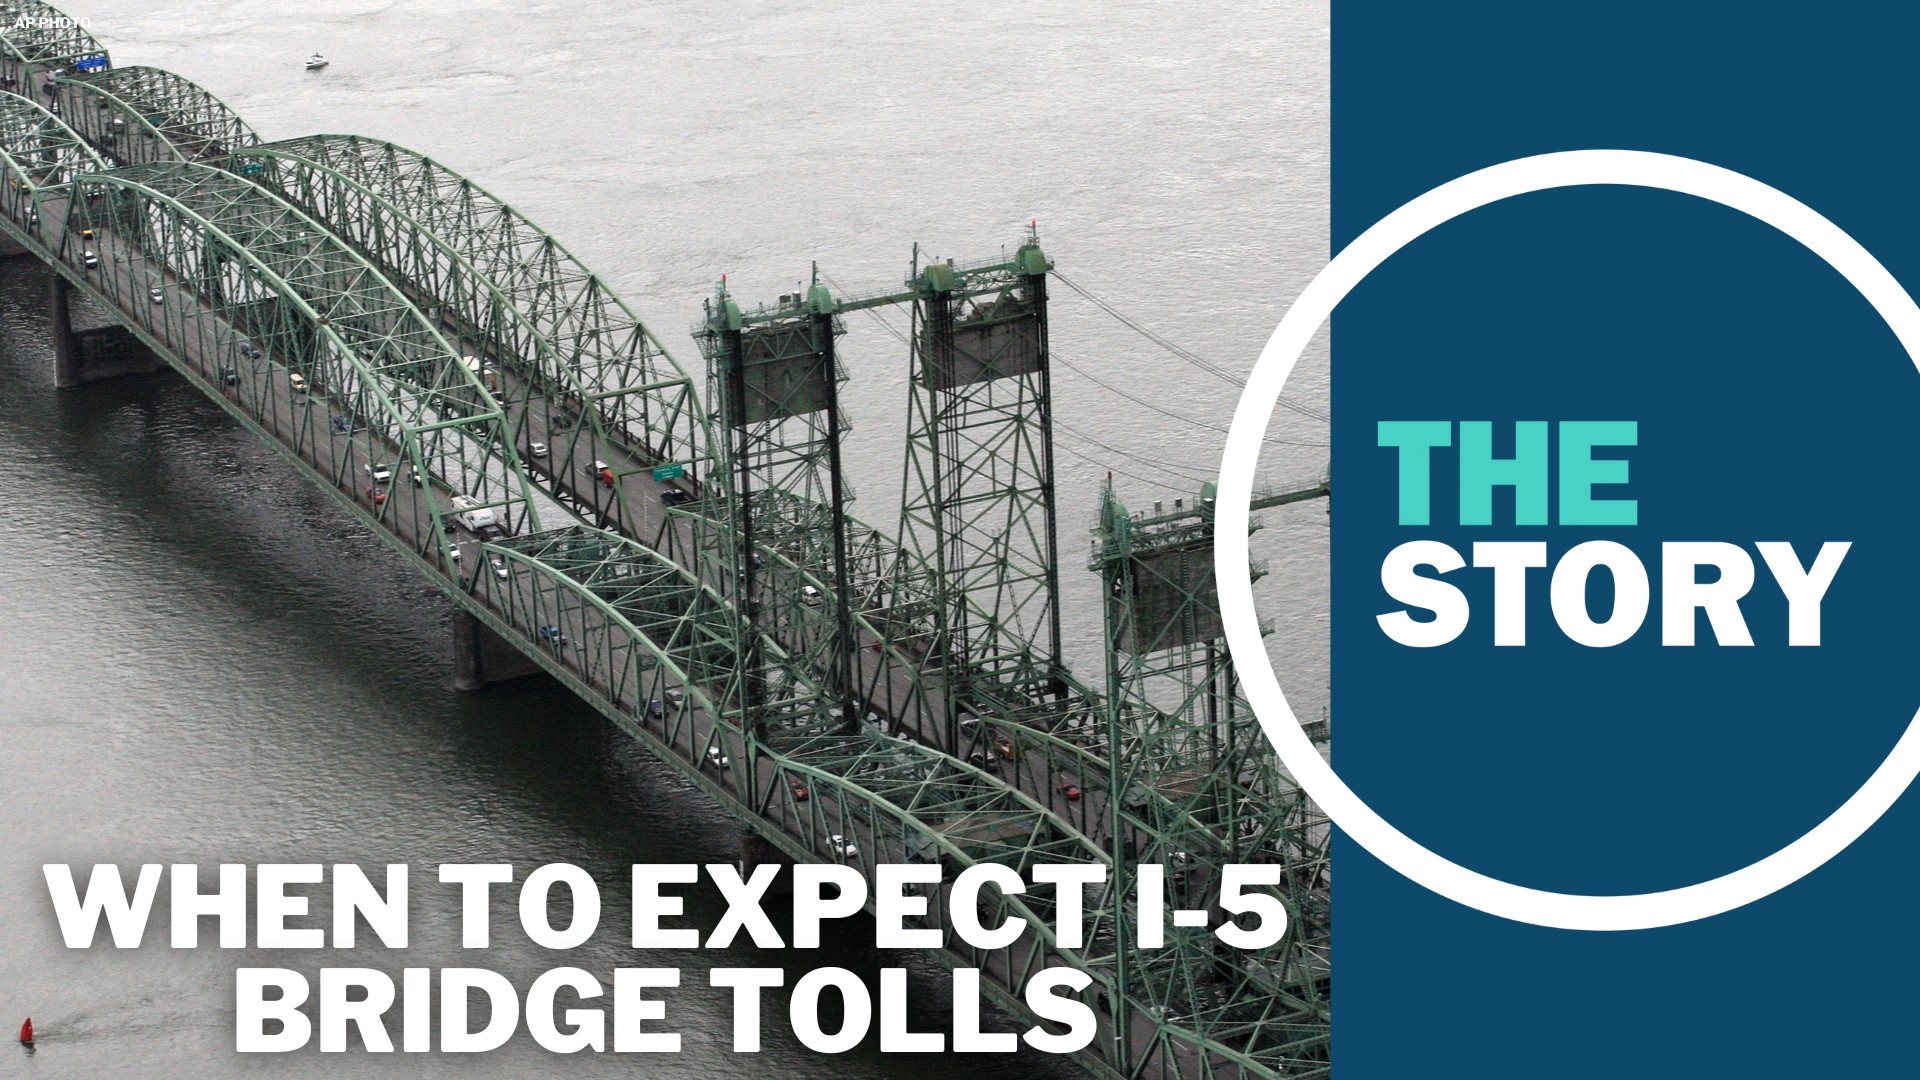 If things go the way project planners hope, construction of the new bridge could begin in just a couple years — and tolling likely wouldn't be far behind.